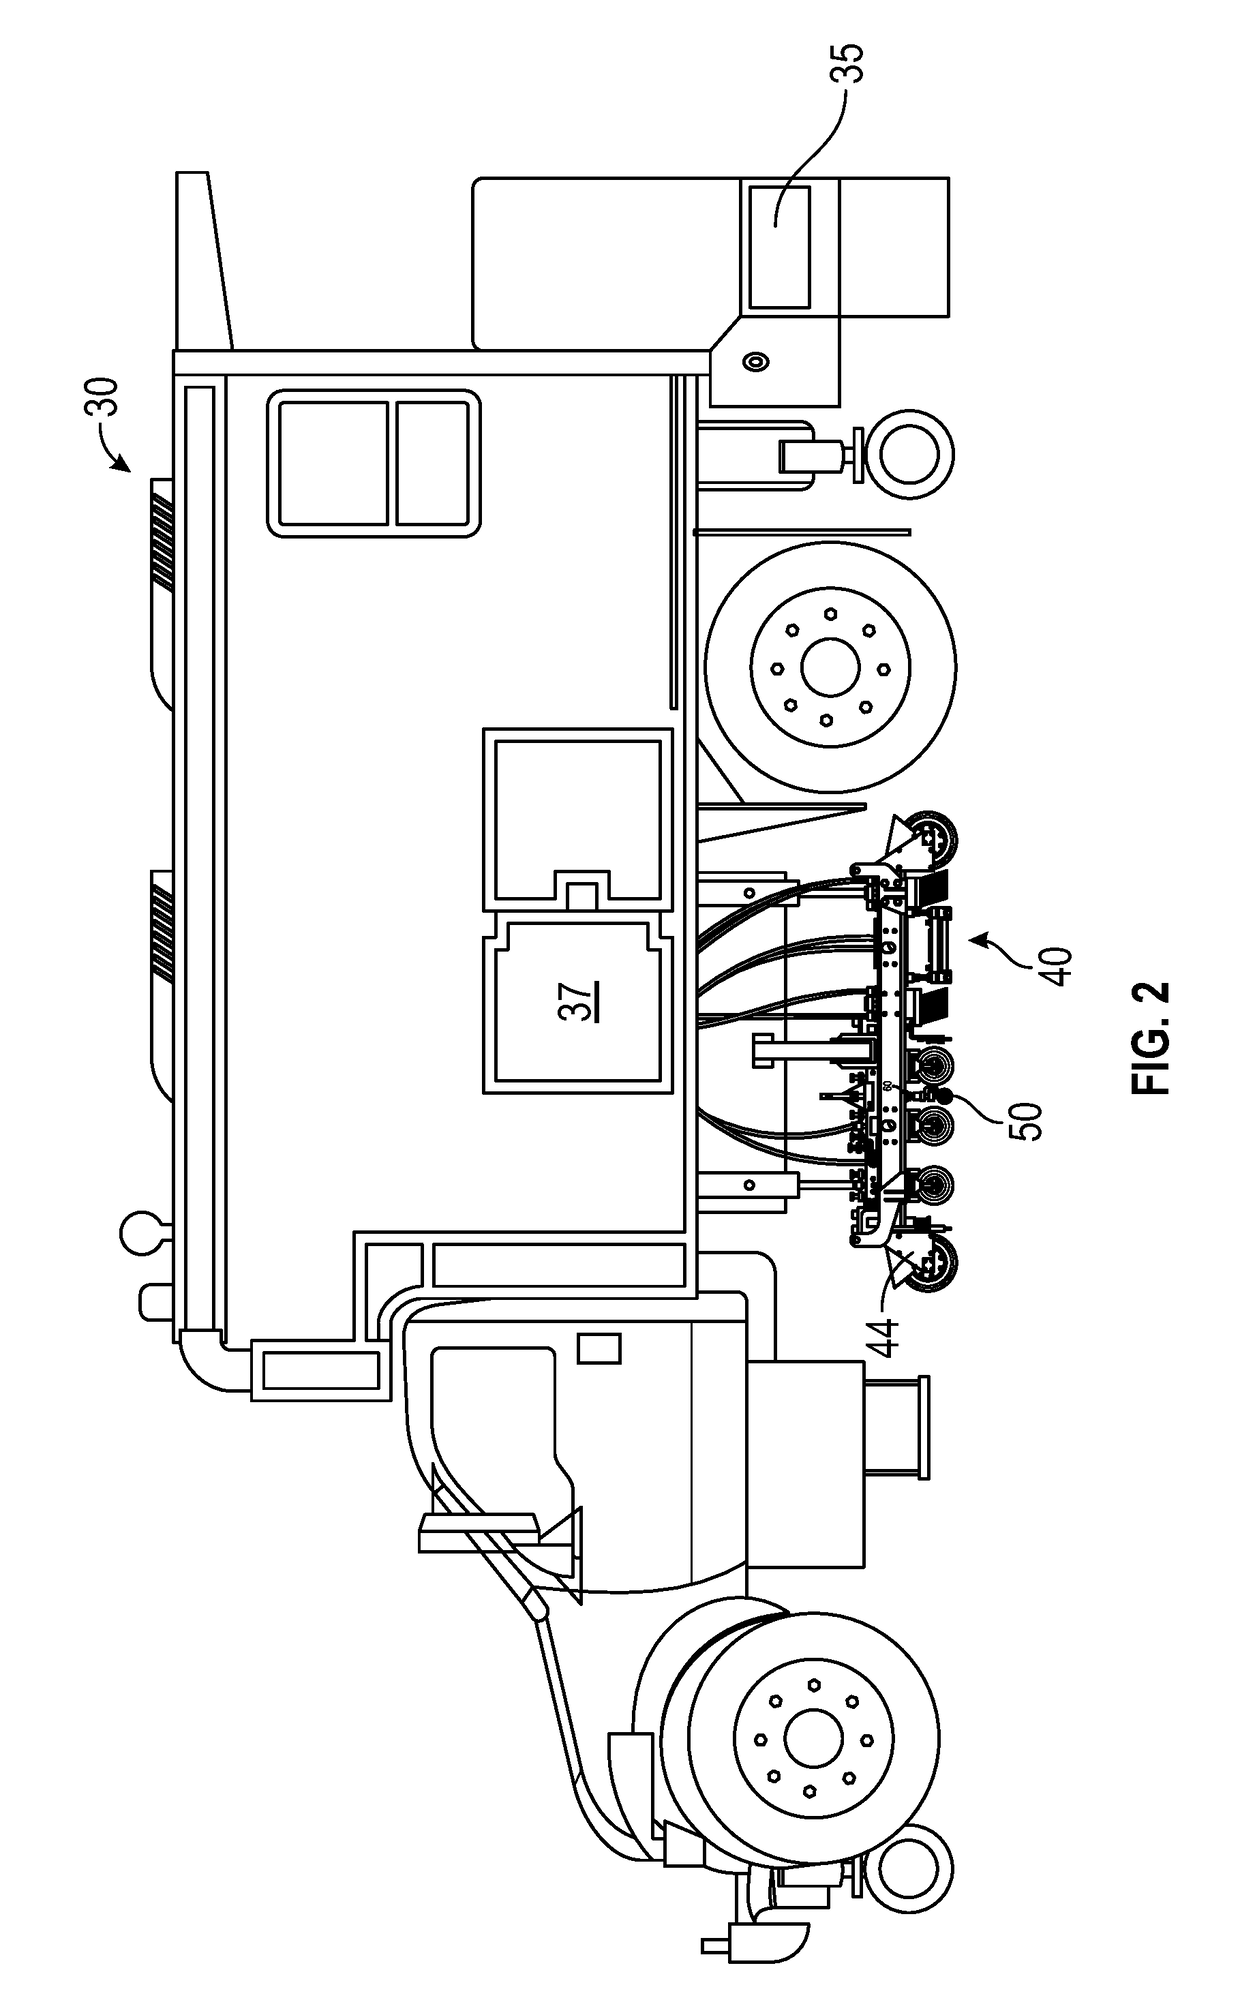 Rail inspection apparatus and method